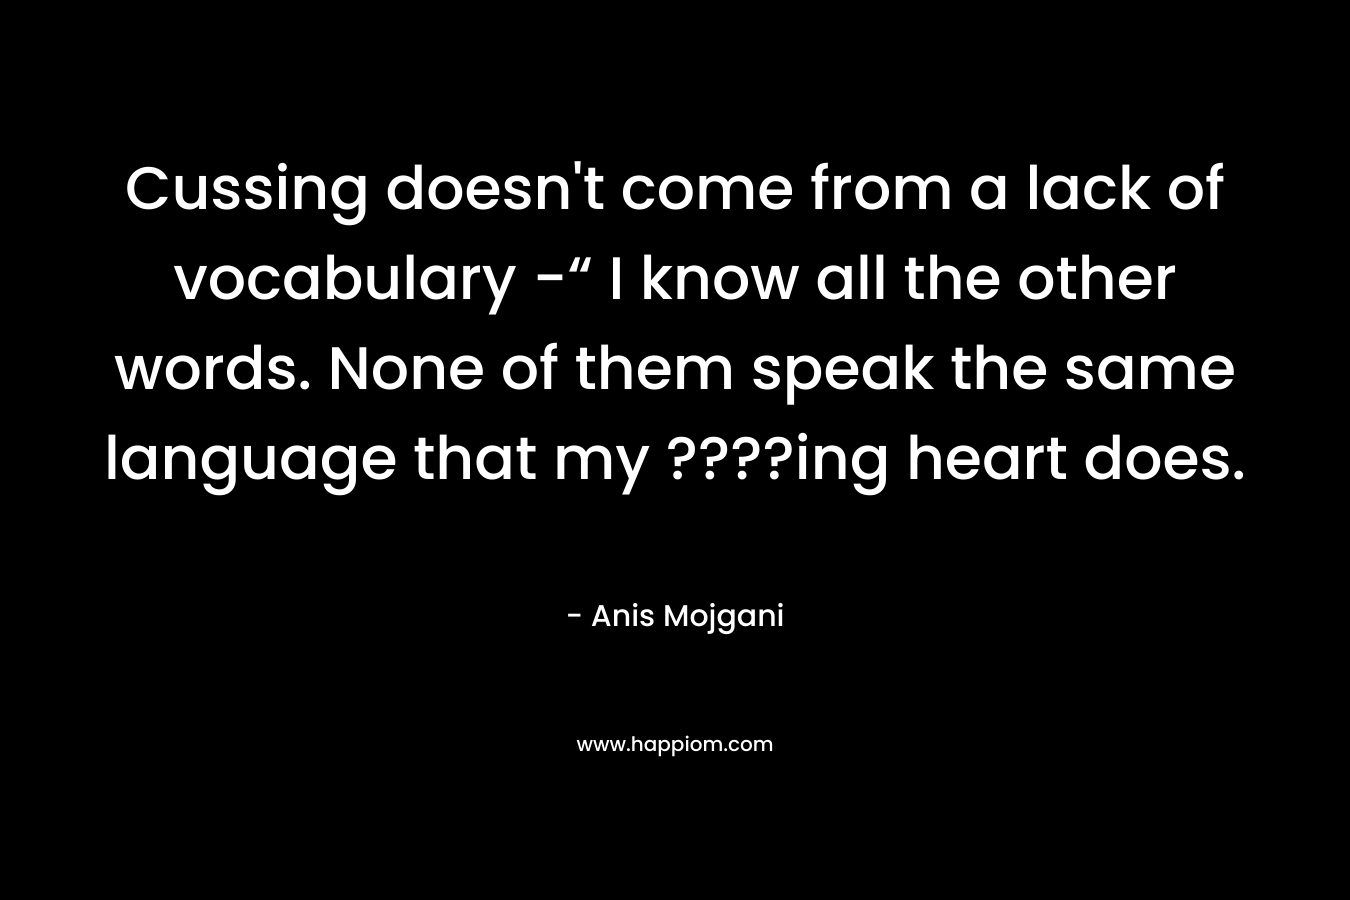 Cussing doesn’t come from a lack of vocabulary -“ I know all the other words. None of them speak the same language that my ????ing heart does. – Anis Mojgani